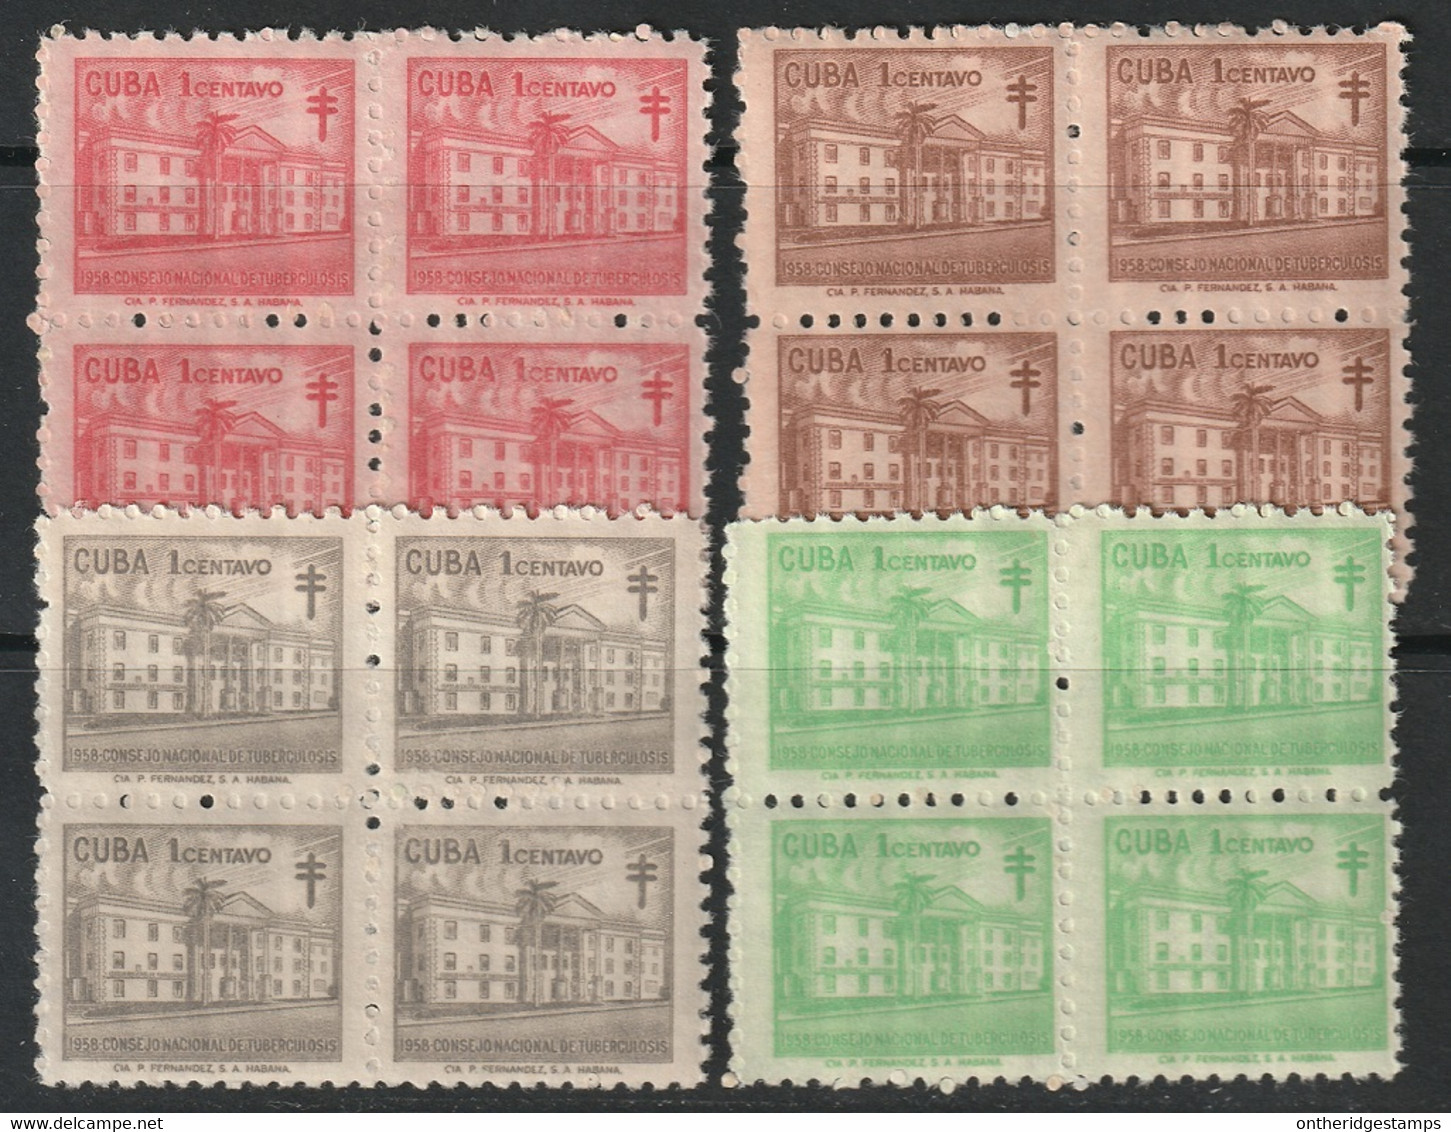 Cuba 1958 Sc RA39-42 Yt Bienfaisance 36-9 Postage Tax Set Blocks MNH** Some Ink On Gum - Charity Issues